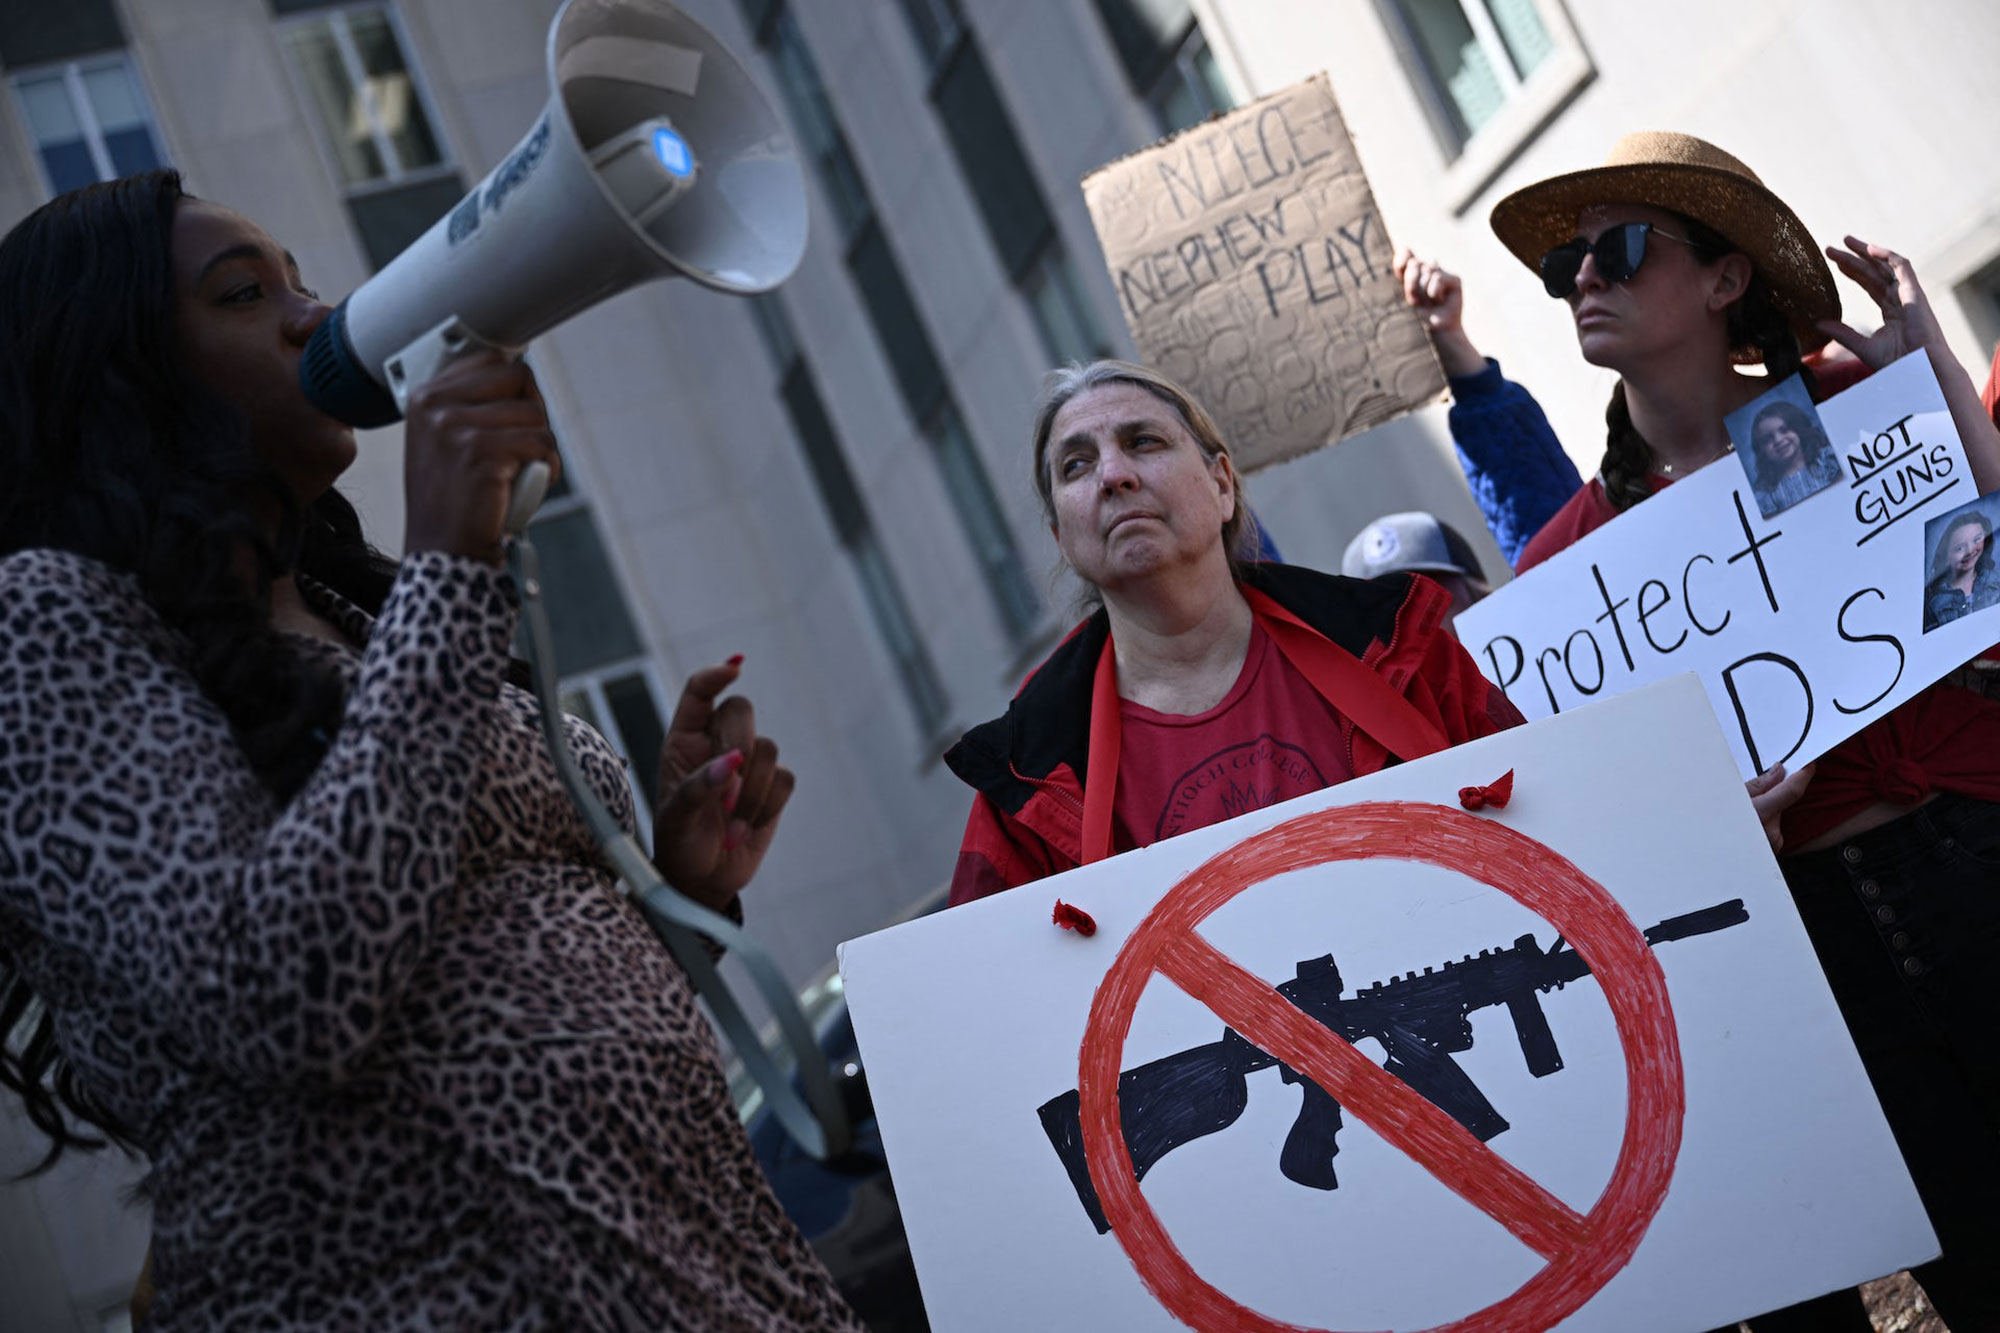 People holding signs at a gun control activists rally in Nashville, Tenn